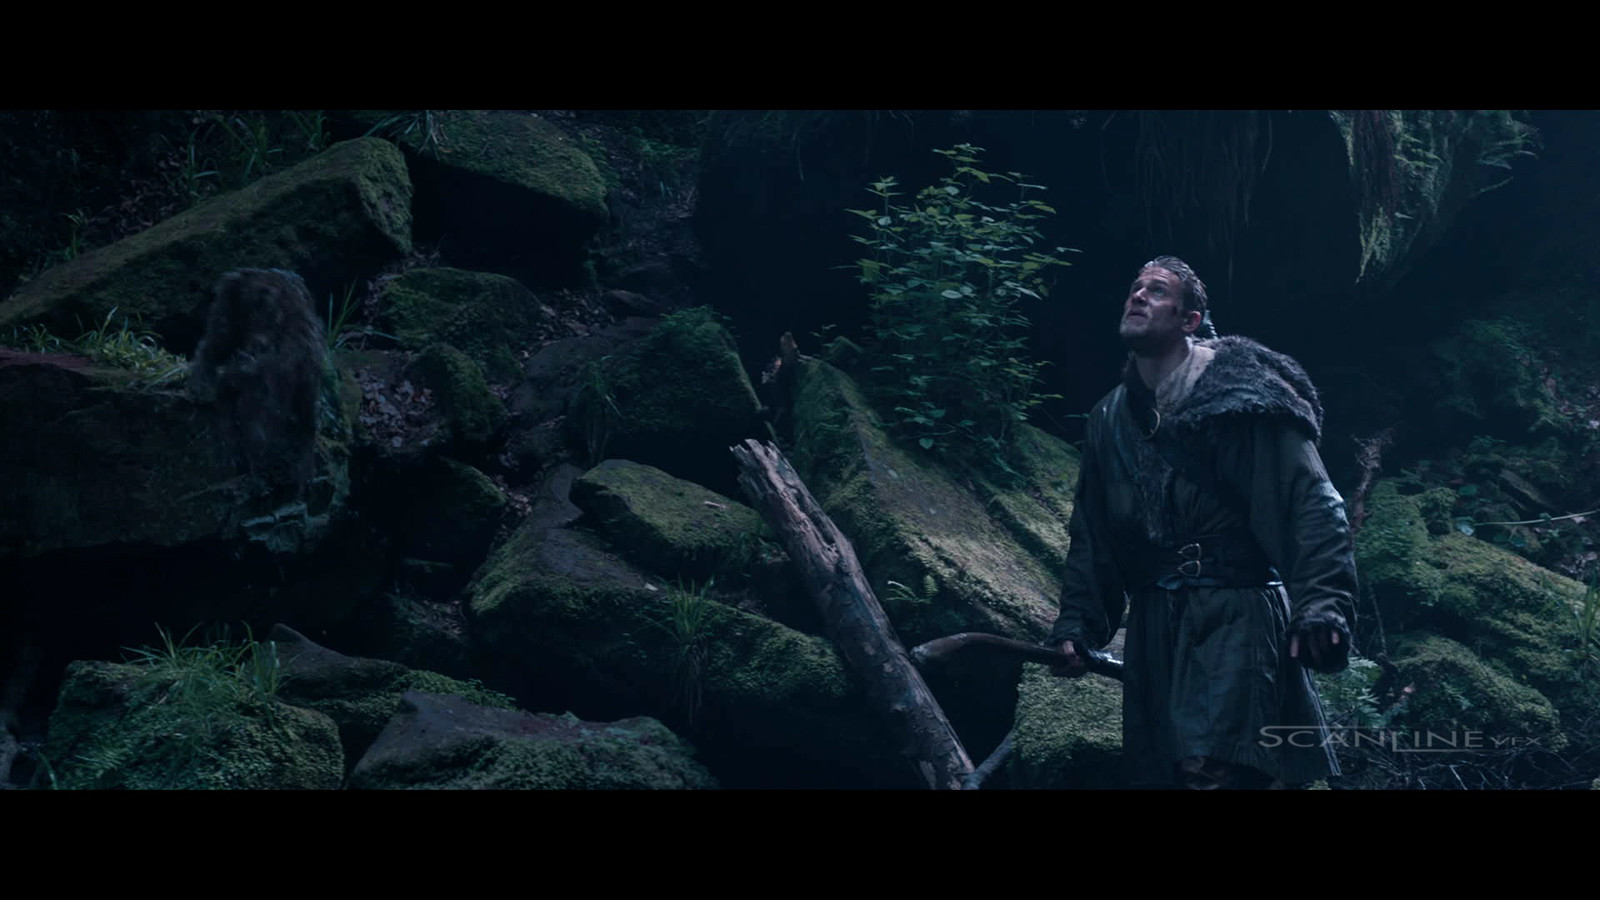 Compositing and integration work  for King Arthur - Legend of the Sword, 2017 - Work done at Scanline VFX with a team of 3D artists.  Software used: Nuke.

Full CG Rat, CG Water, DMP and Plate Integration.